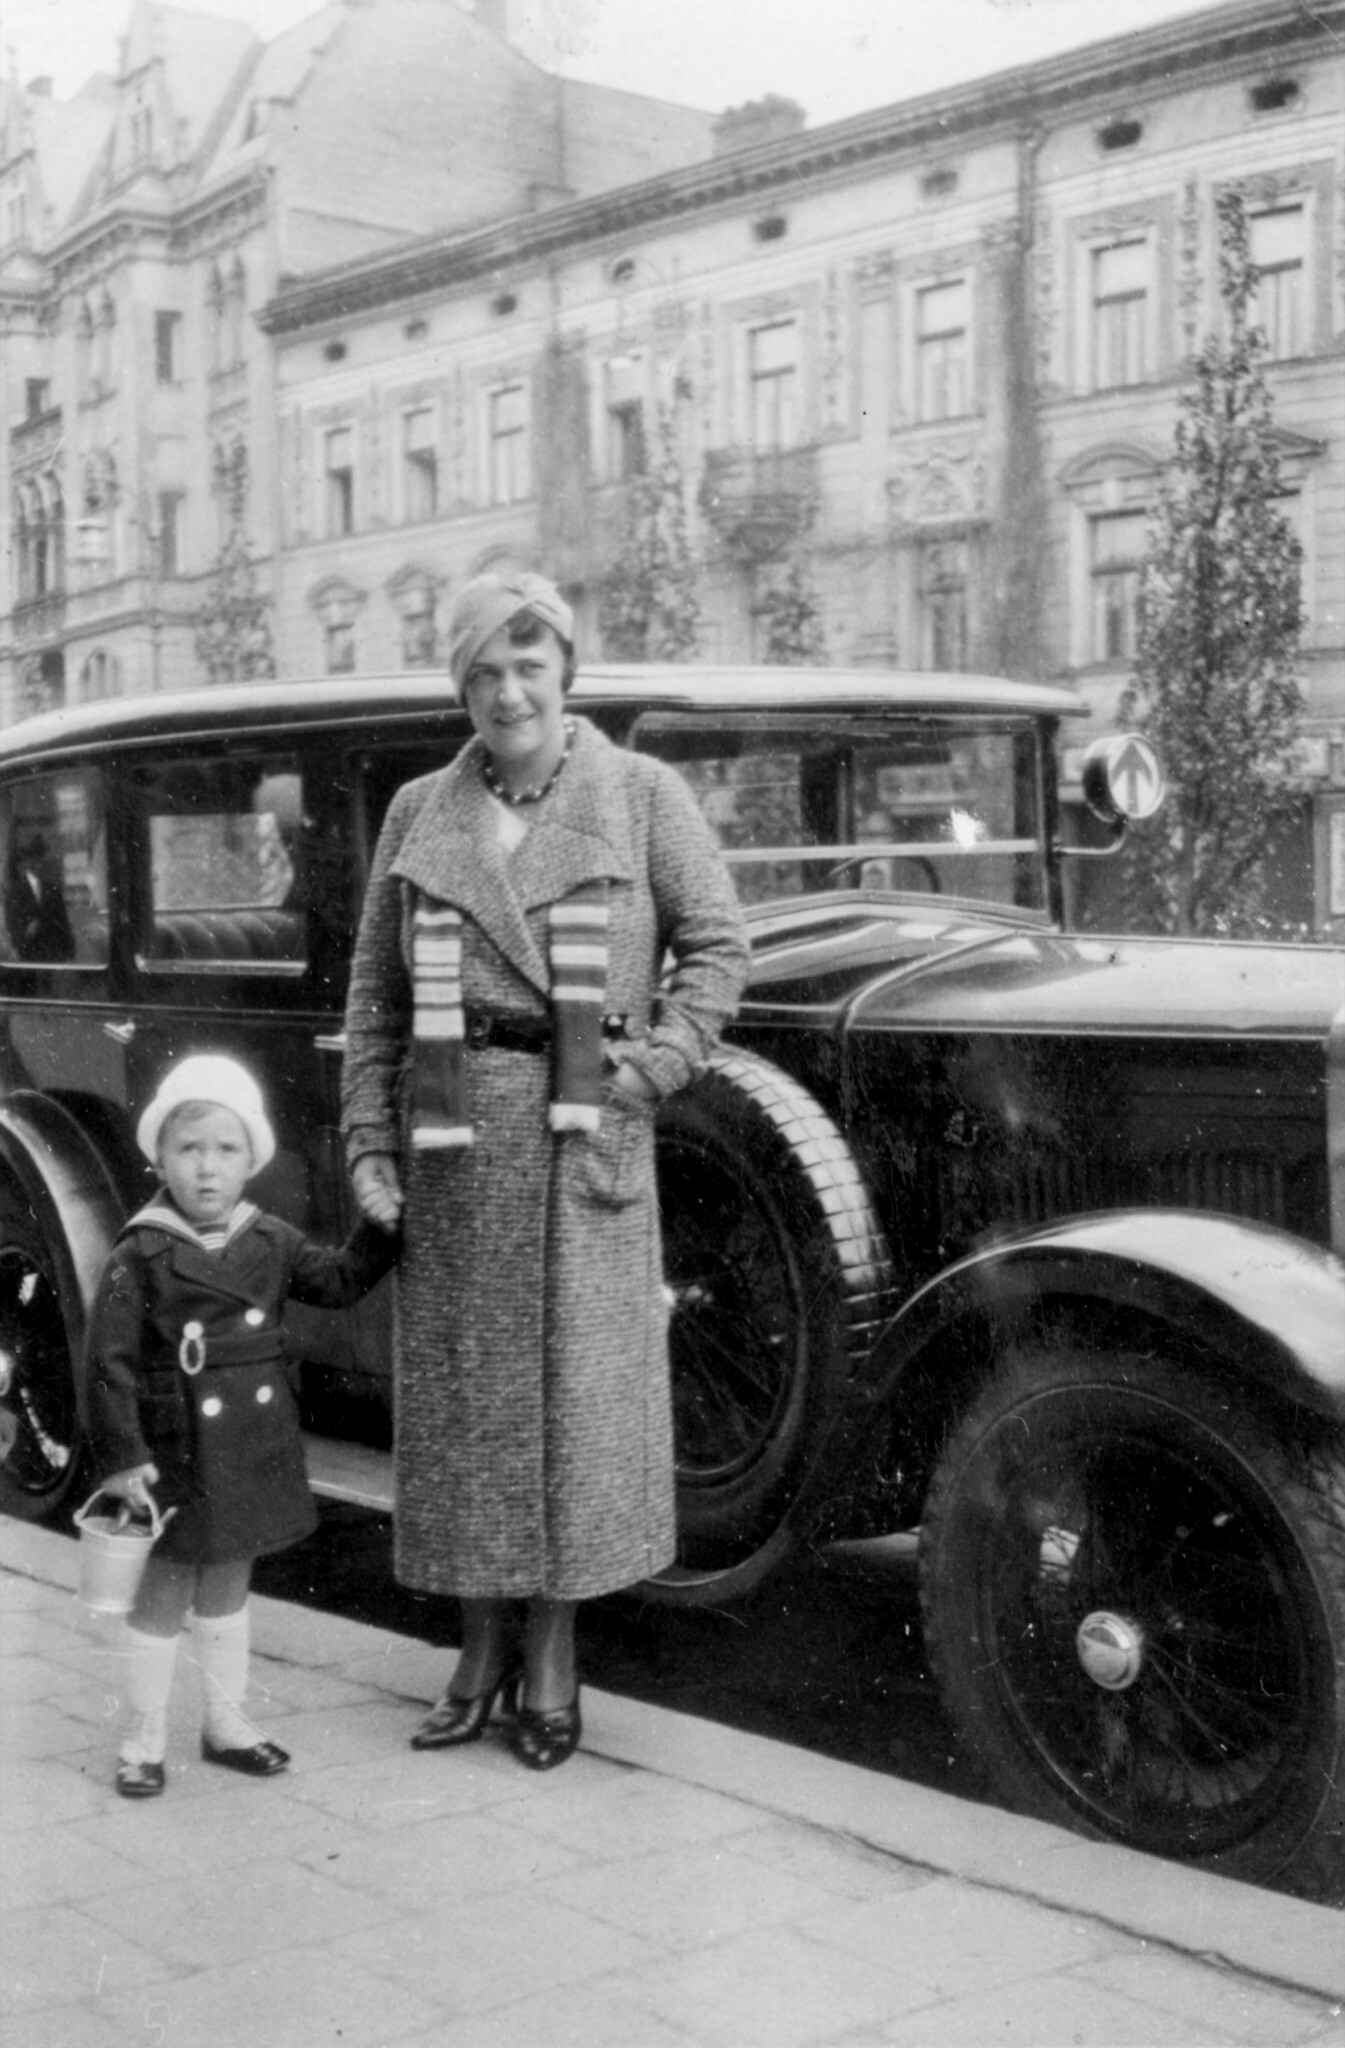 Caught between Hitler and Stalin, one family's miraculous tale of survival